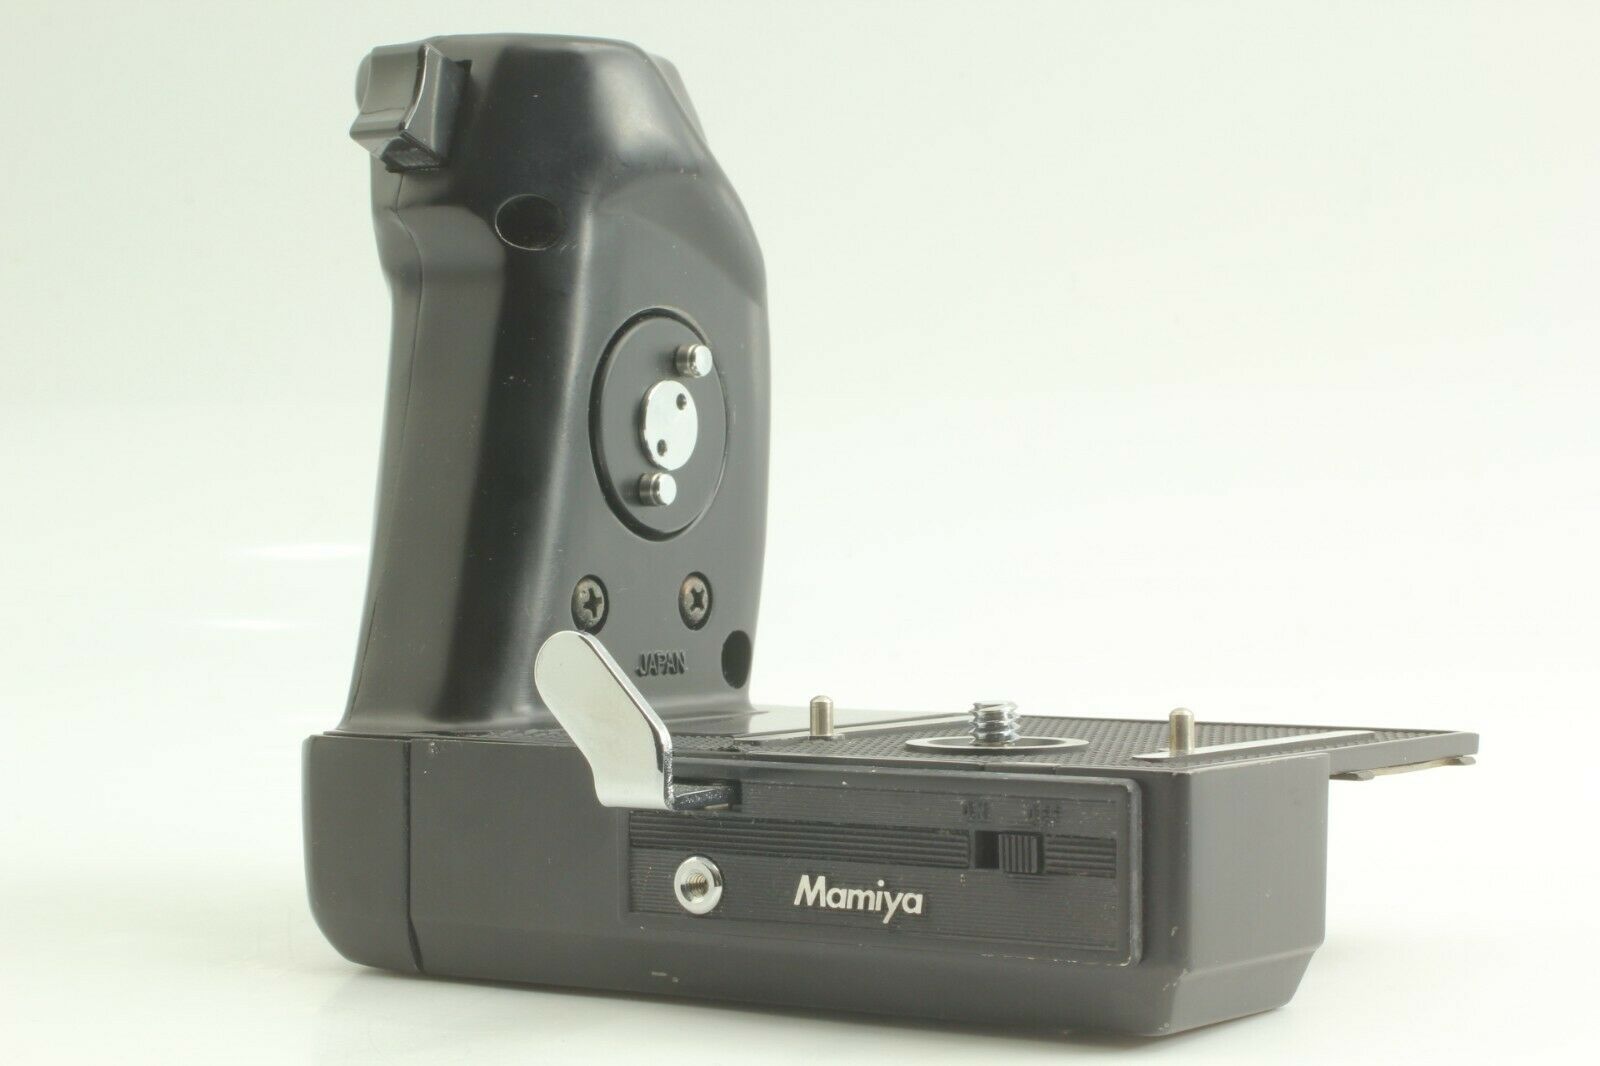 [exc+5] Mamiya Motor Drive Power Winder Hand Grip For M645 1000s From Japan